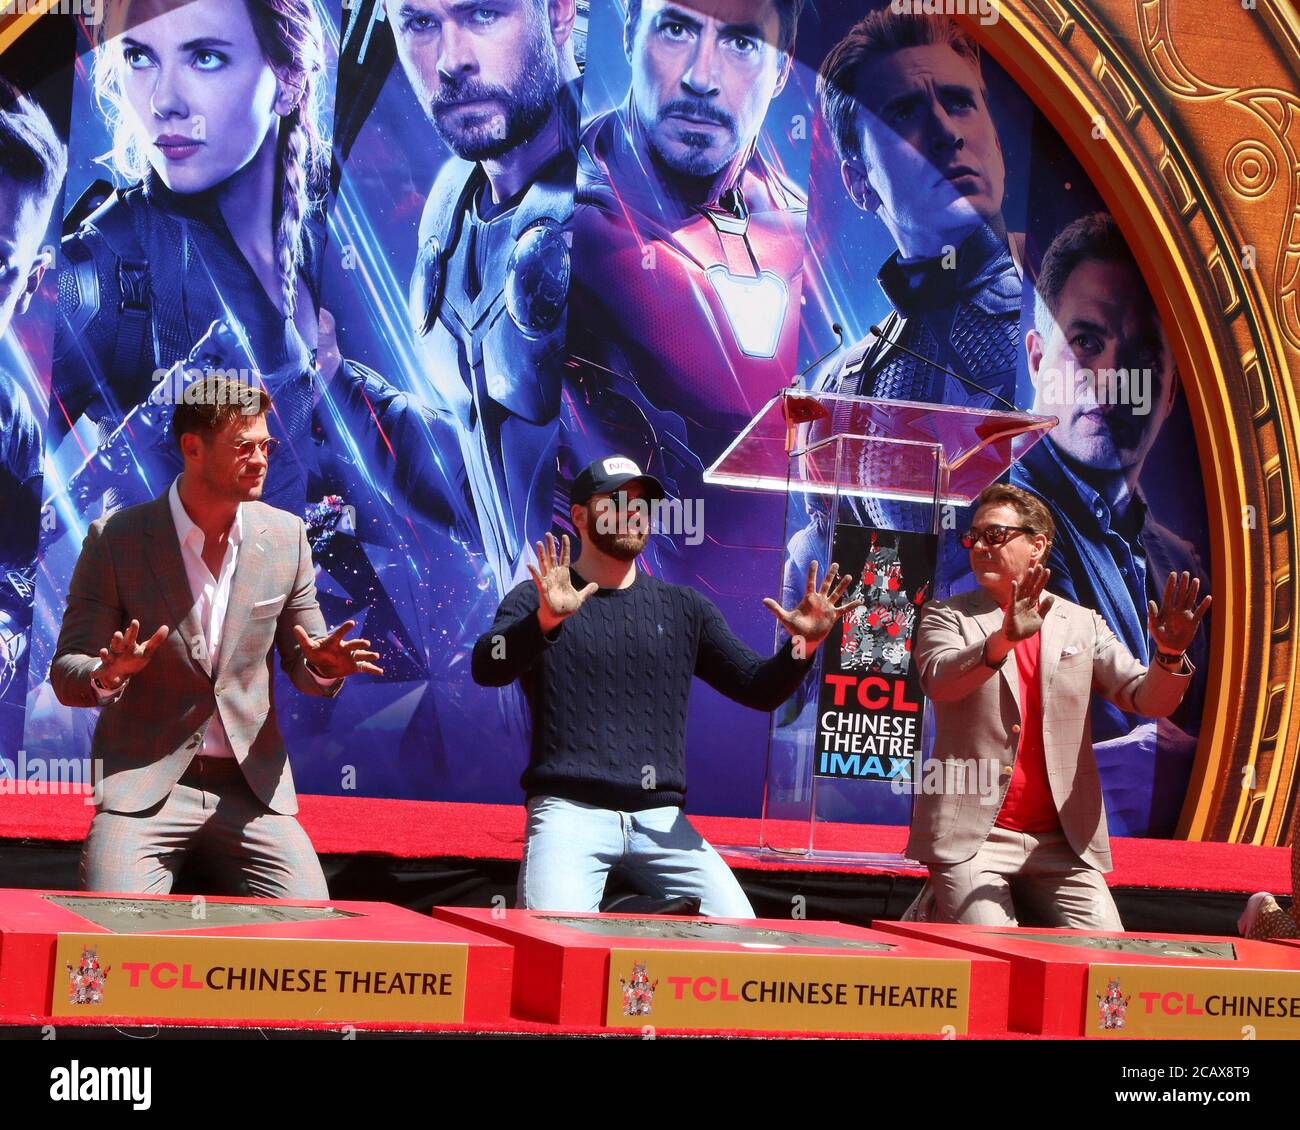 LOS ANGELES - APR 23:  Chris Hemsworth, Chris Evans, Robert Downey Jr at the Avengers Cast Members Handprint Ceremony at the TCL Chinese Theater on April 23, 2019 in Los Angeles, CA Stock Photo